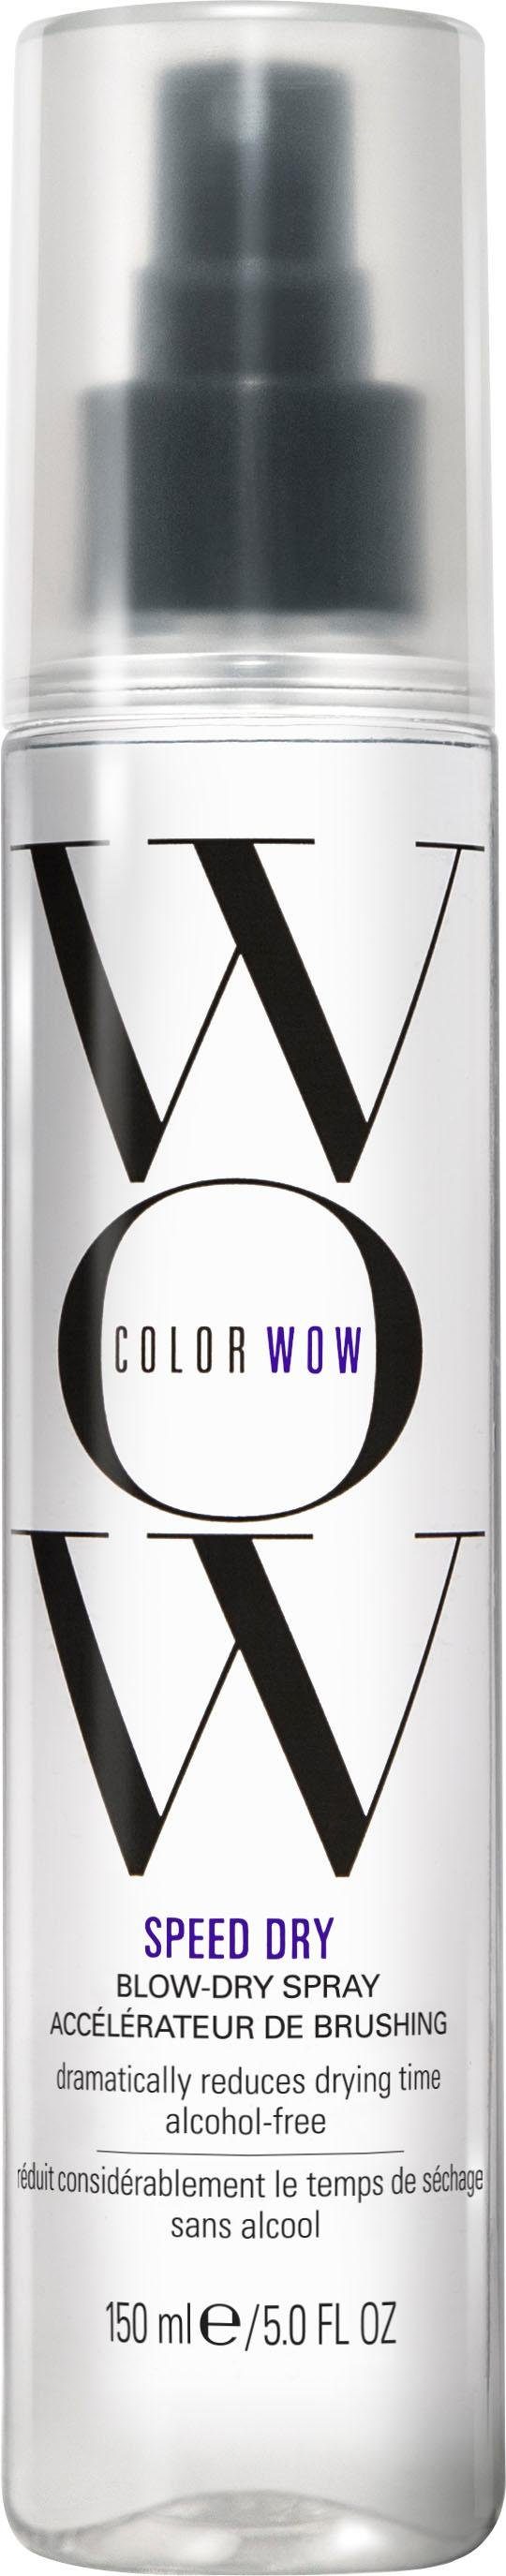 Föhnlotion Dry WOW Speed COLOR